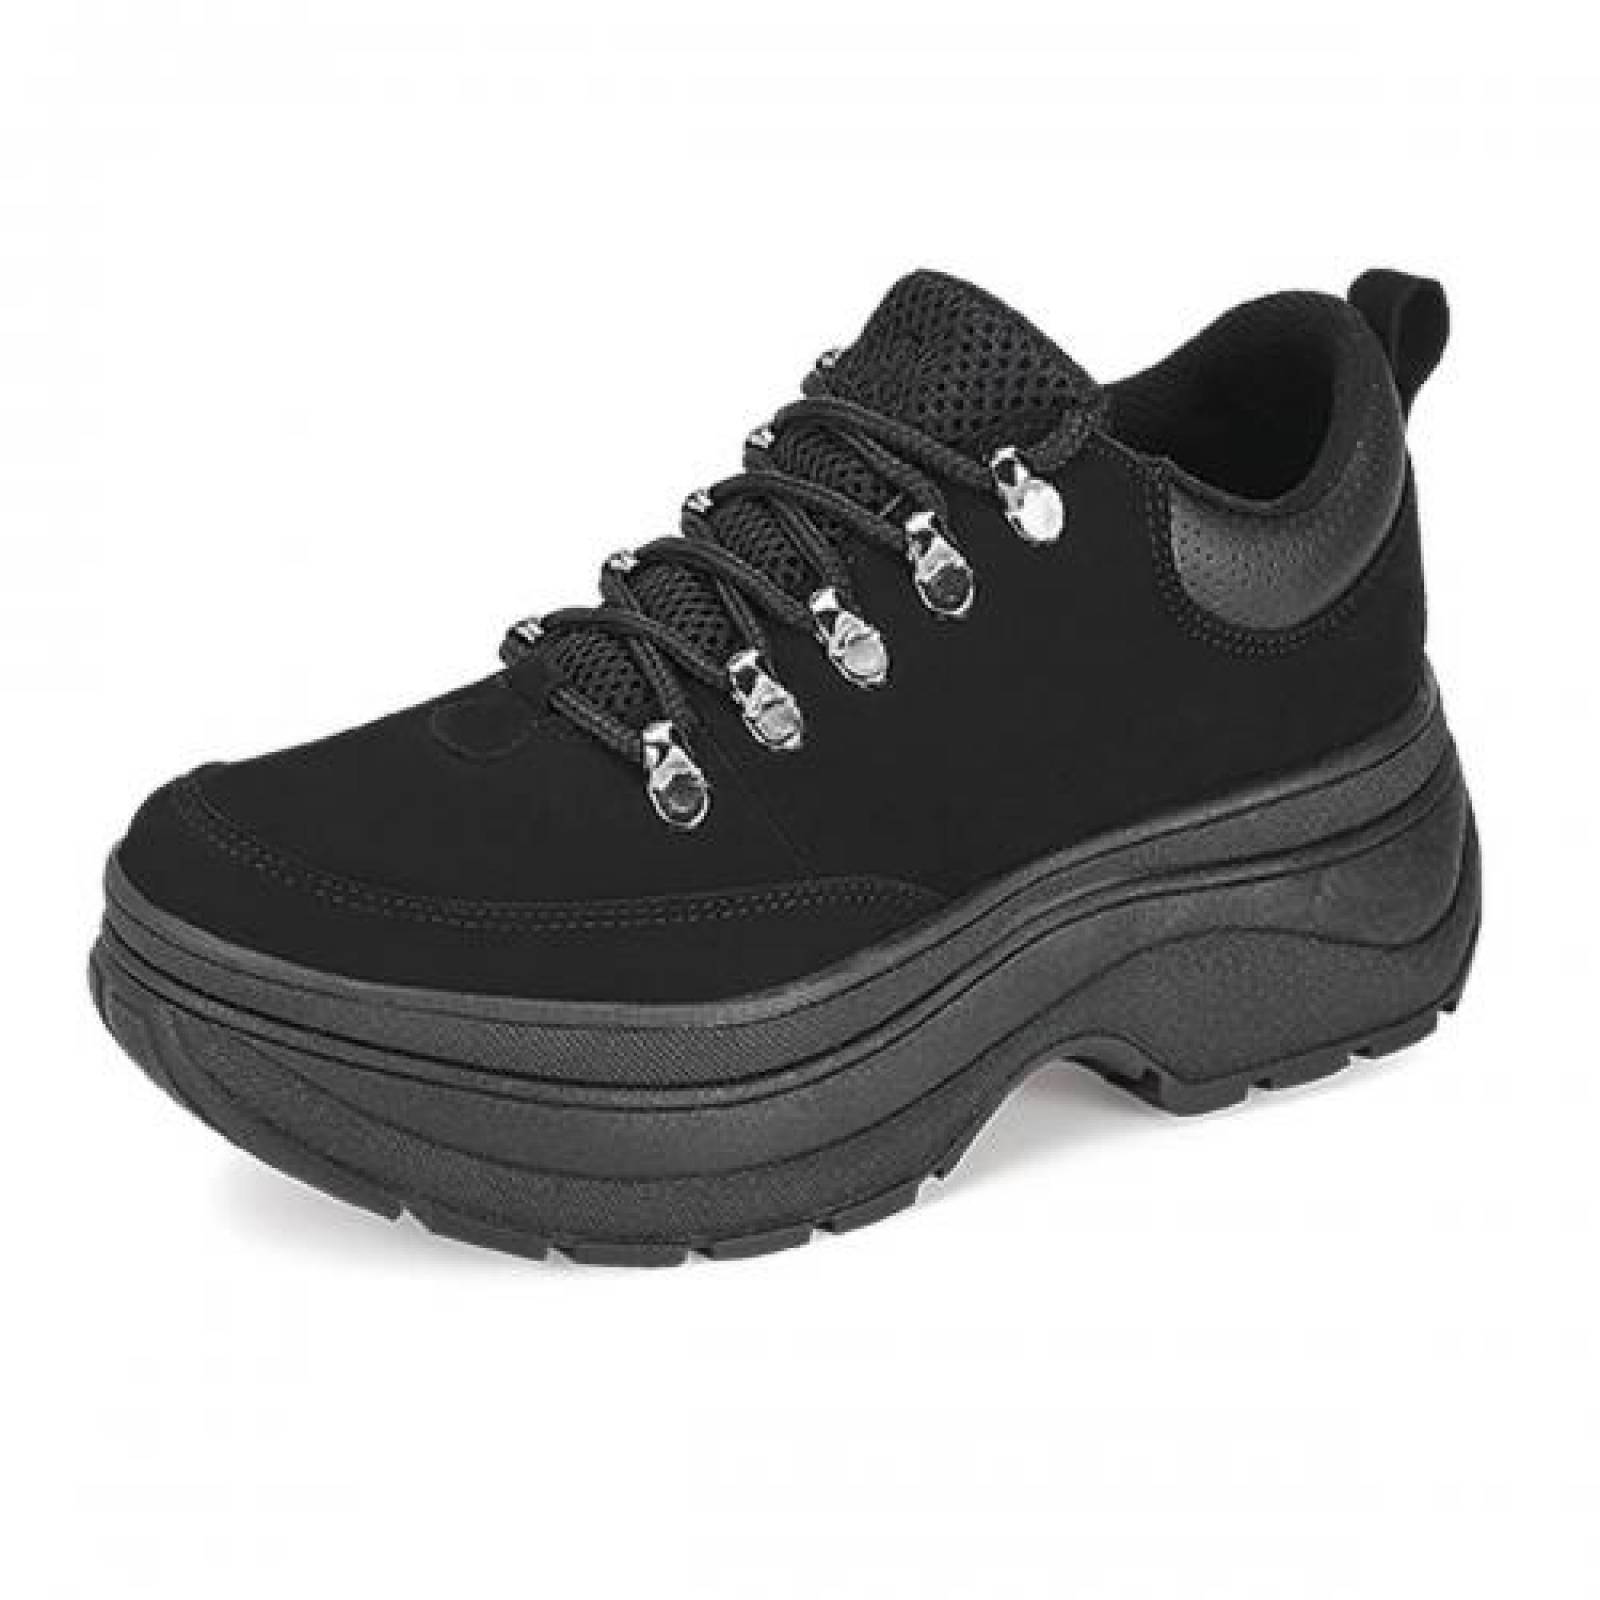 Tenis para Mujer Ovx 2960 055051 Color Negro